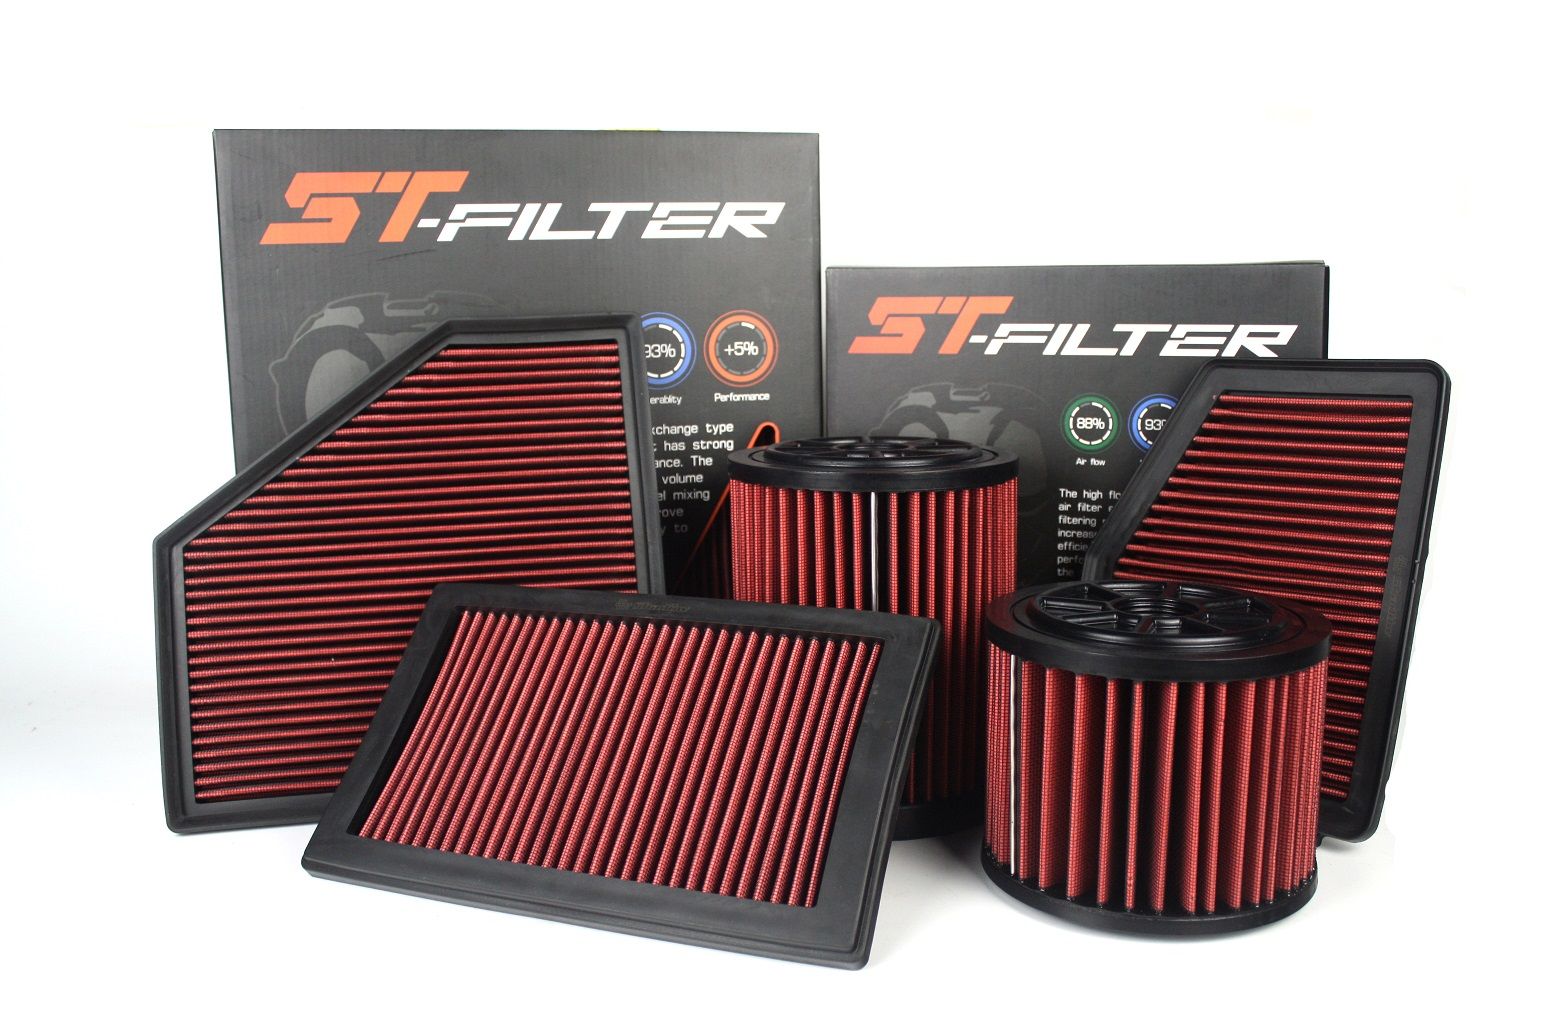 ST-FILTER parts